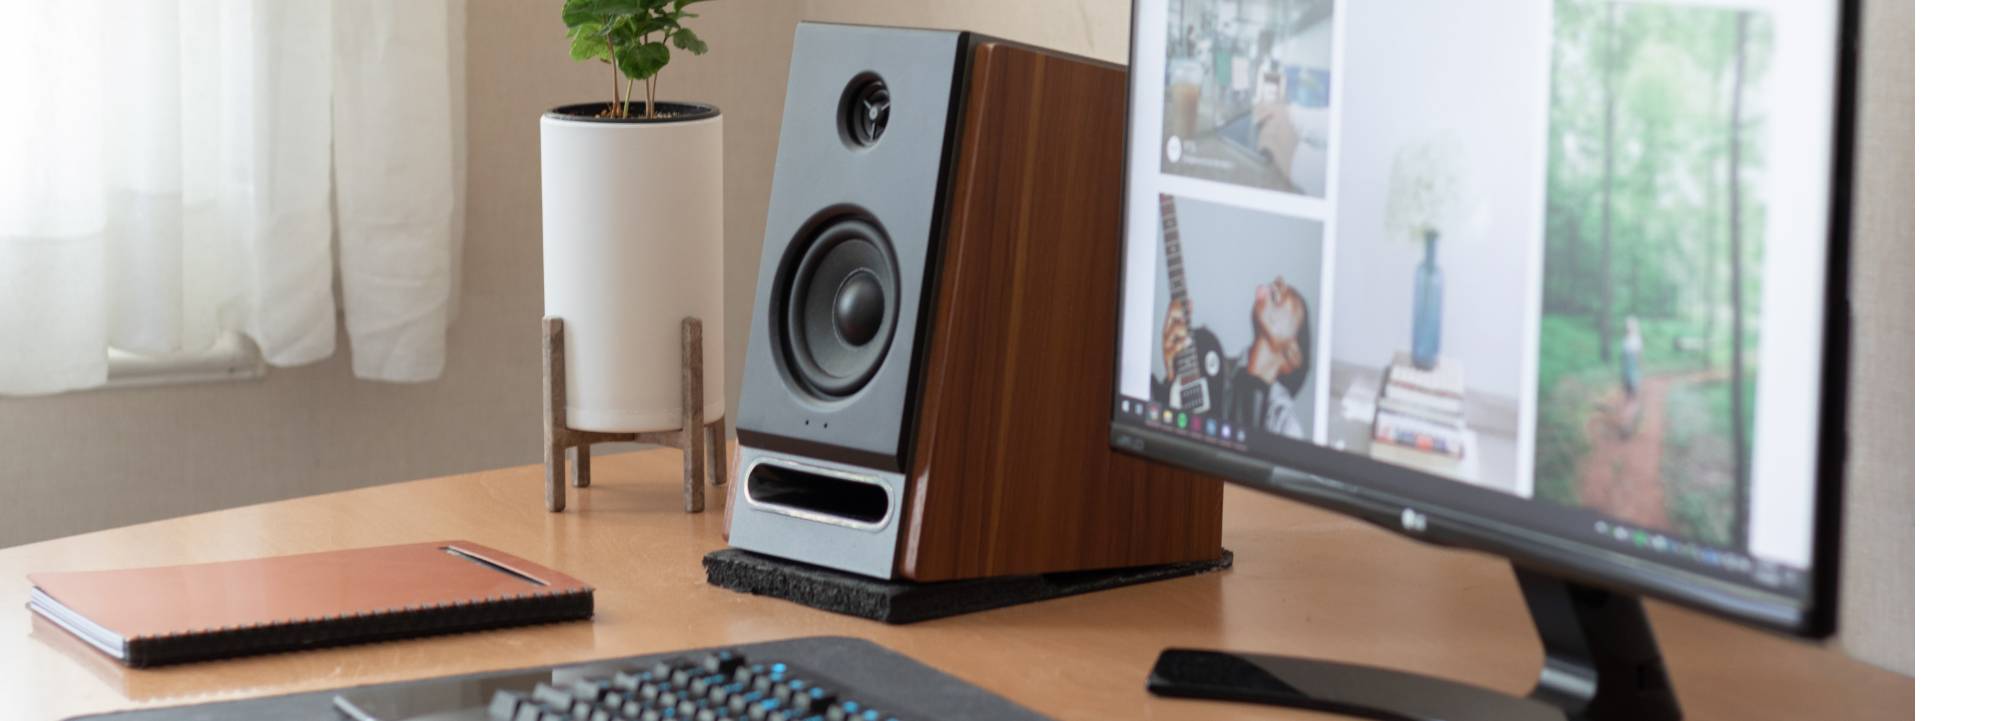 Computer monitor next to a speaker